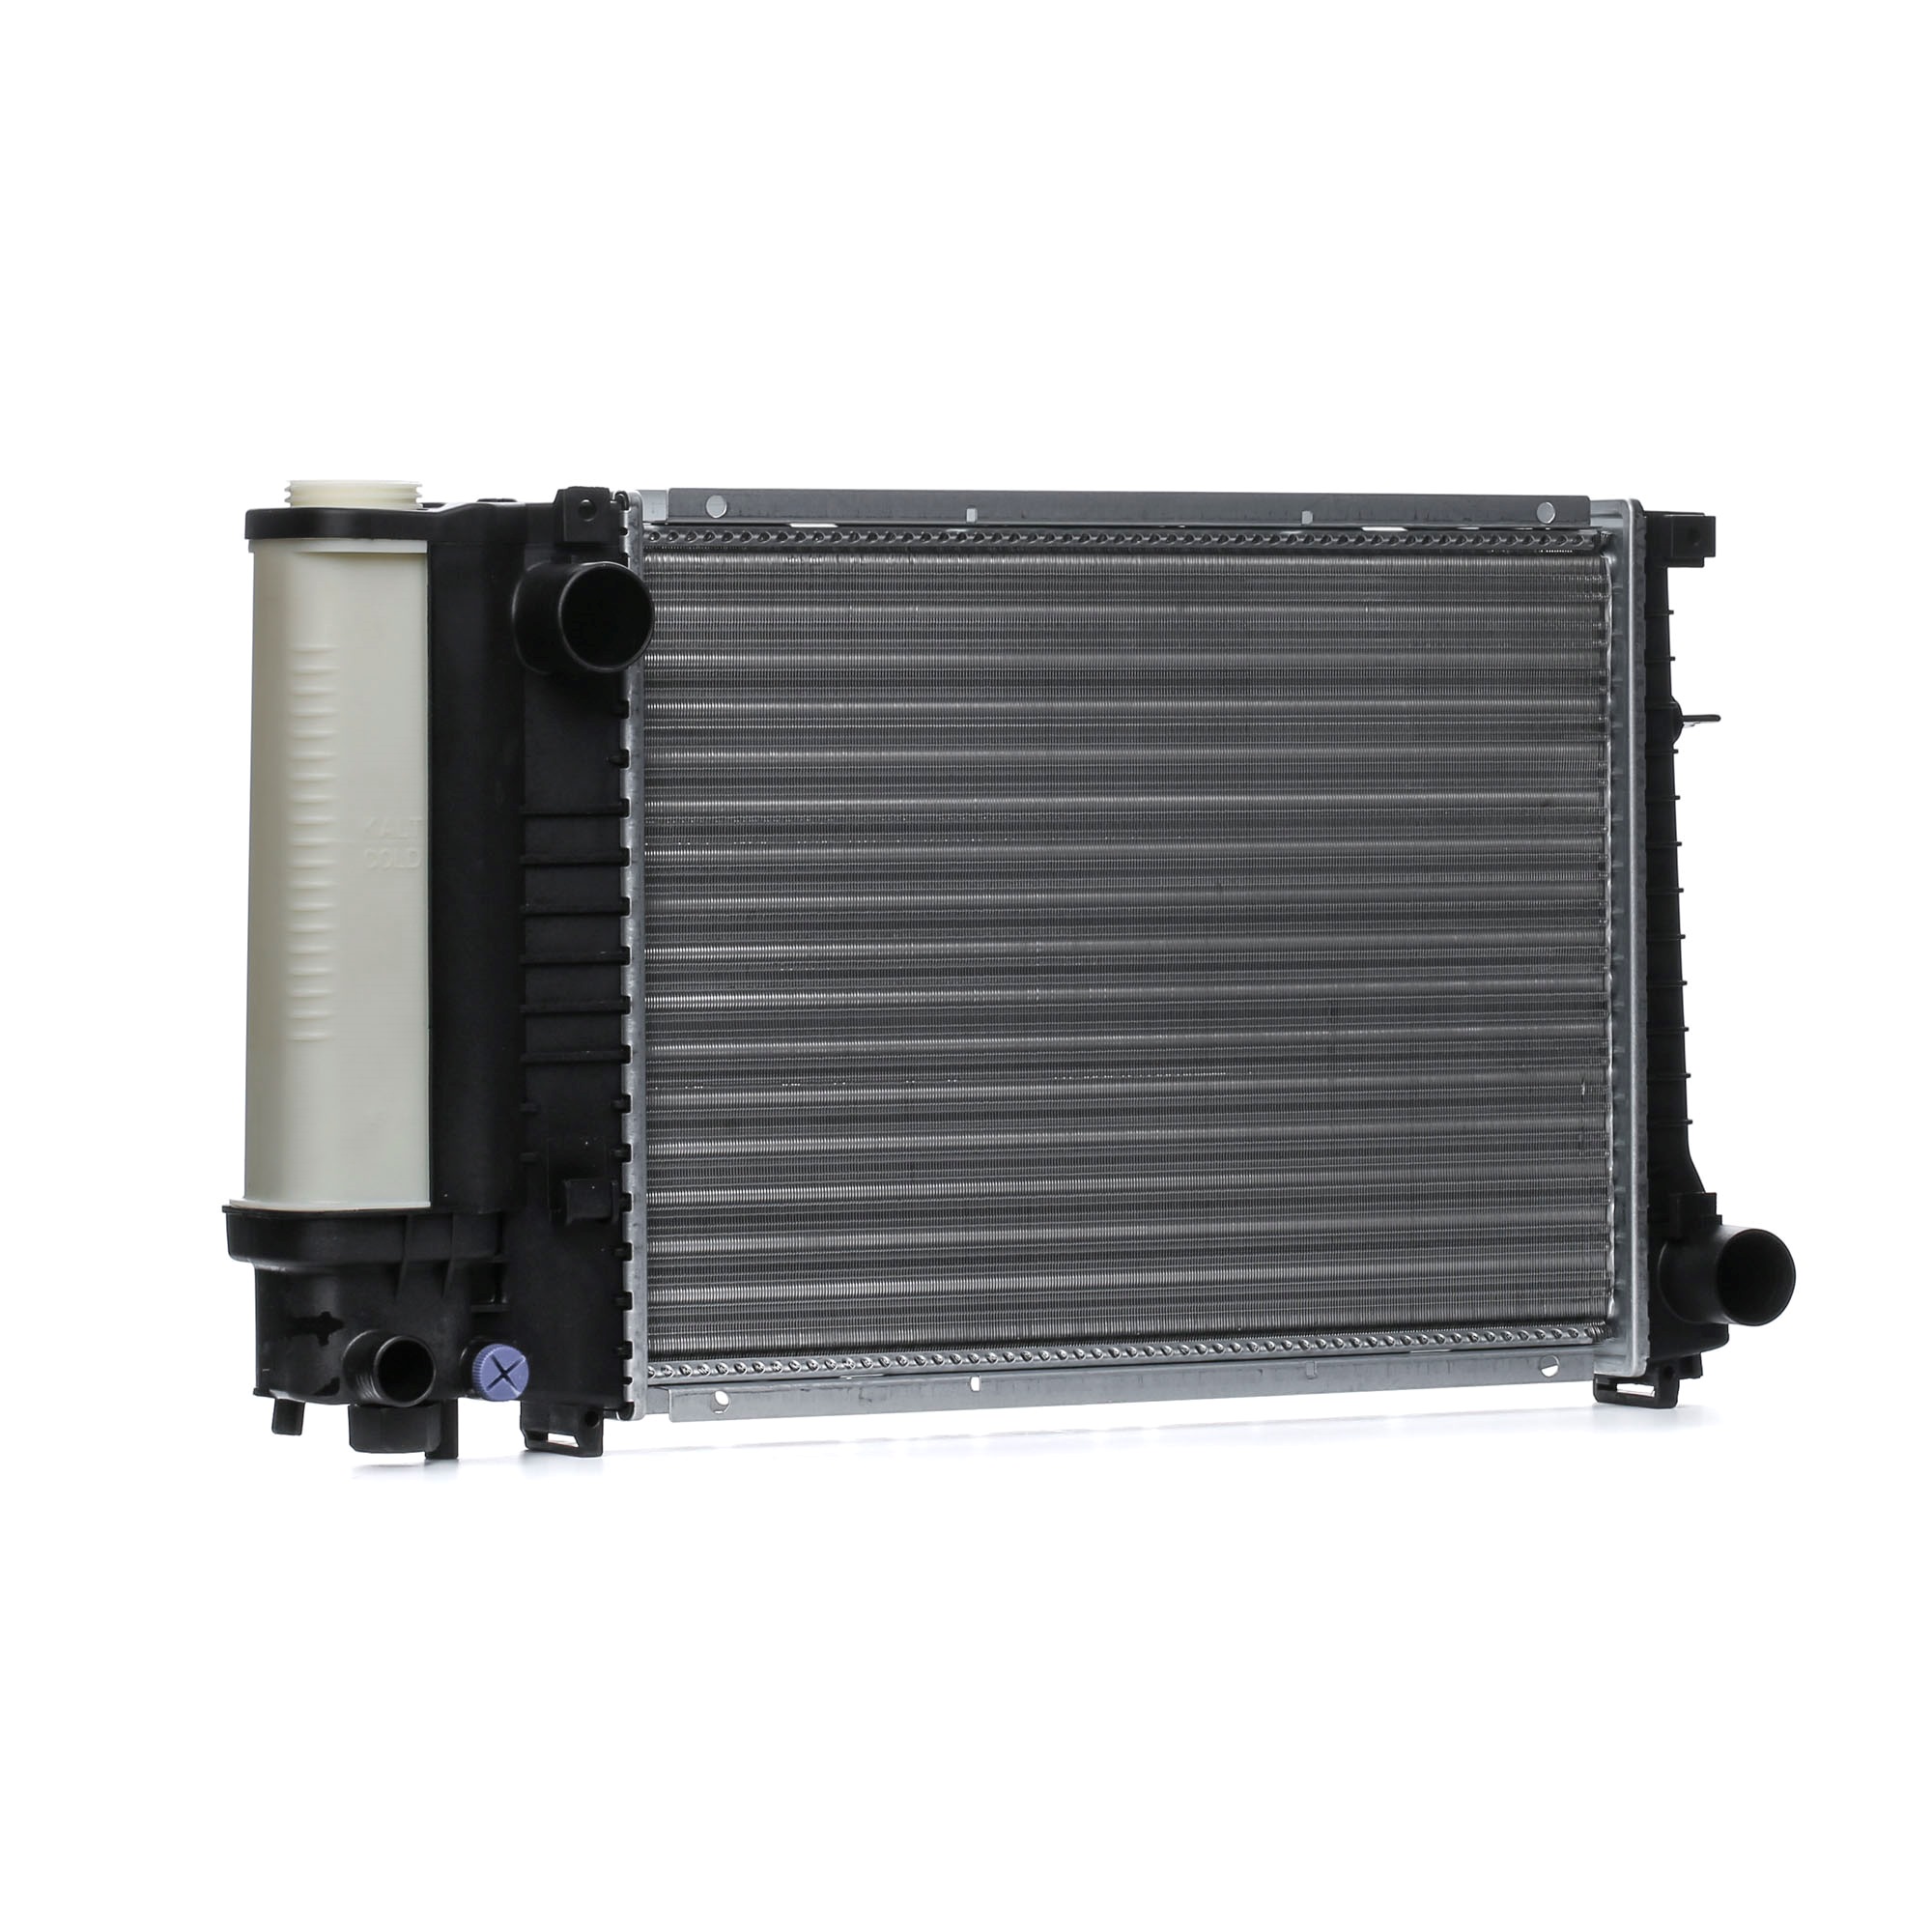 RIDEX 470R1377 Engine radiator for vehicles without air conditioning, 440 x 329 x 42 mm, Manual Transmission, Brazed cooling fins